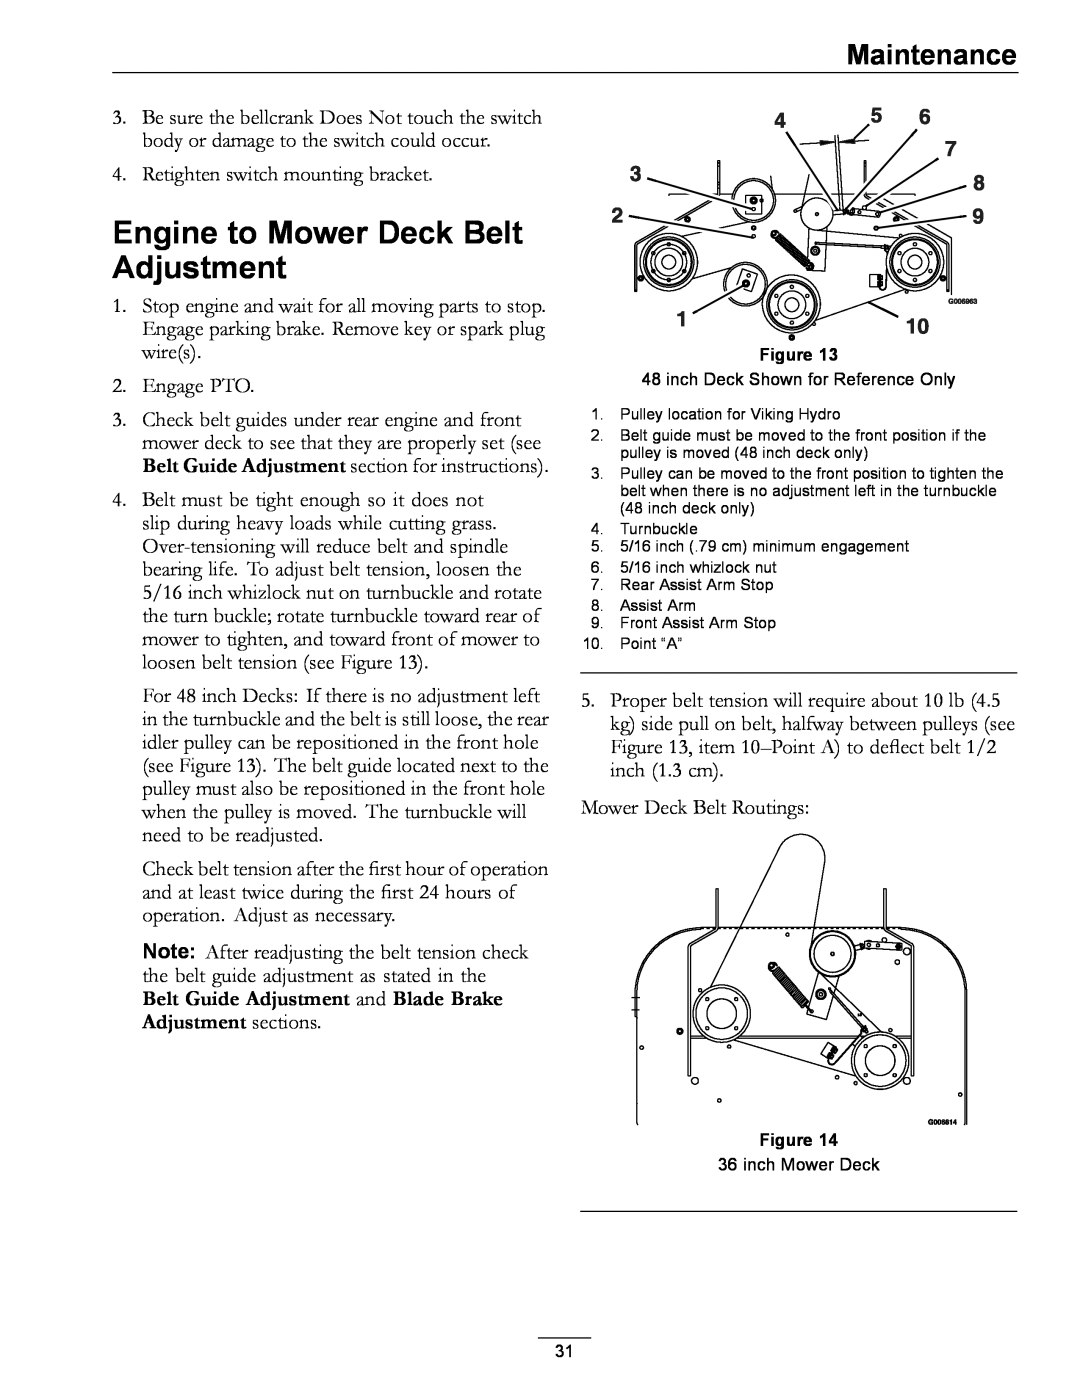 Exmark 4500-355 Engine to Mower Deck Belt Adjustment, Maintenance, inch Deck Shown for Reference Only, inch Mower Deck 